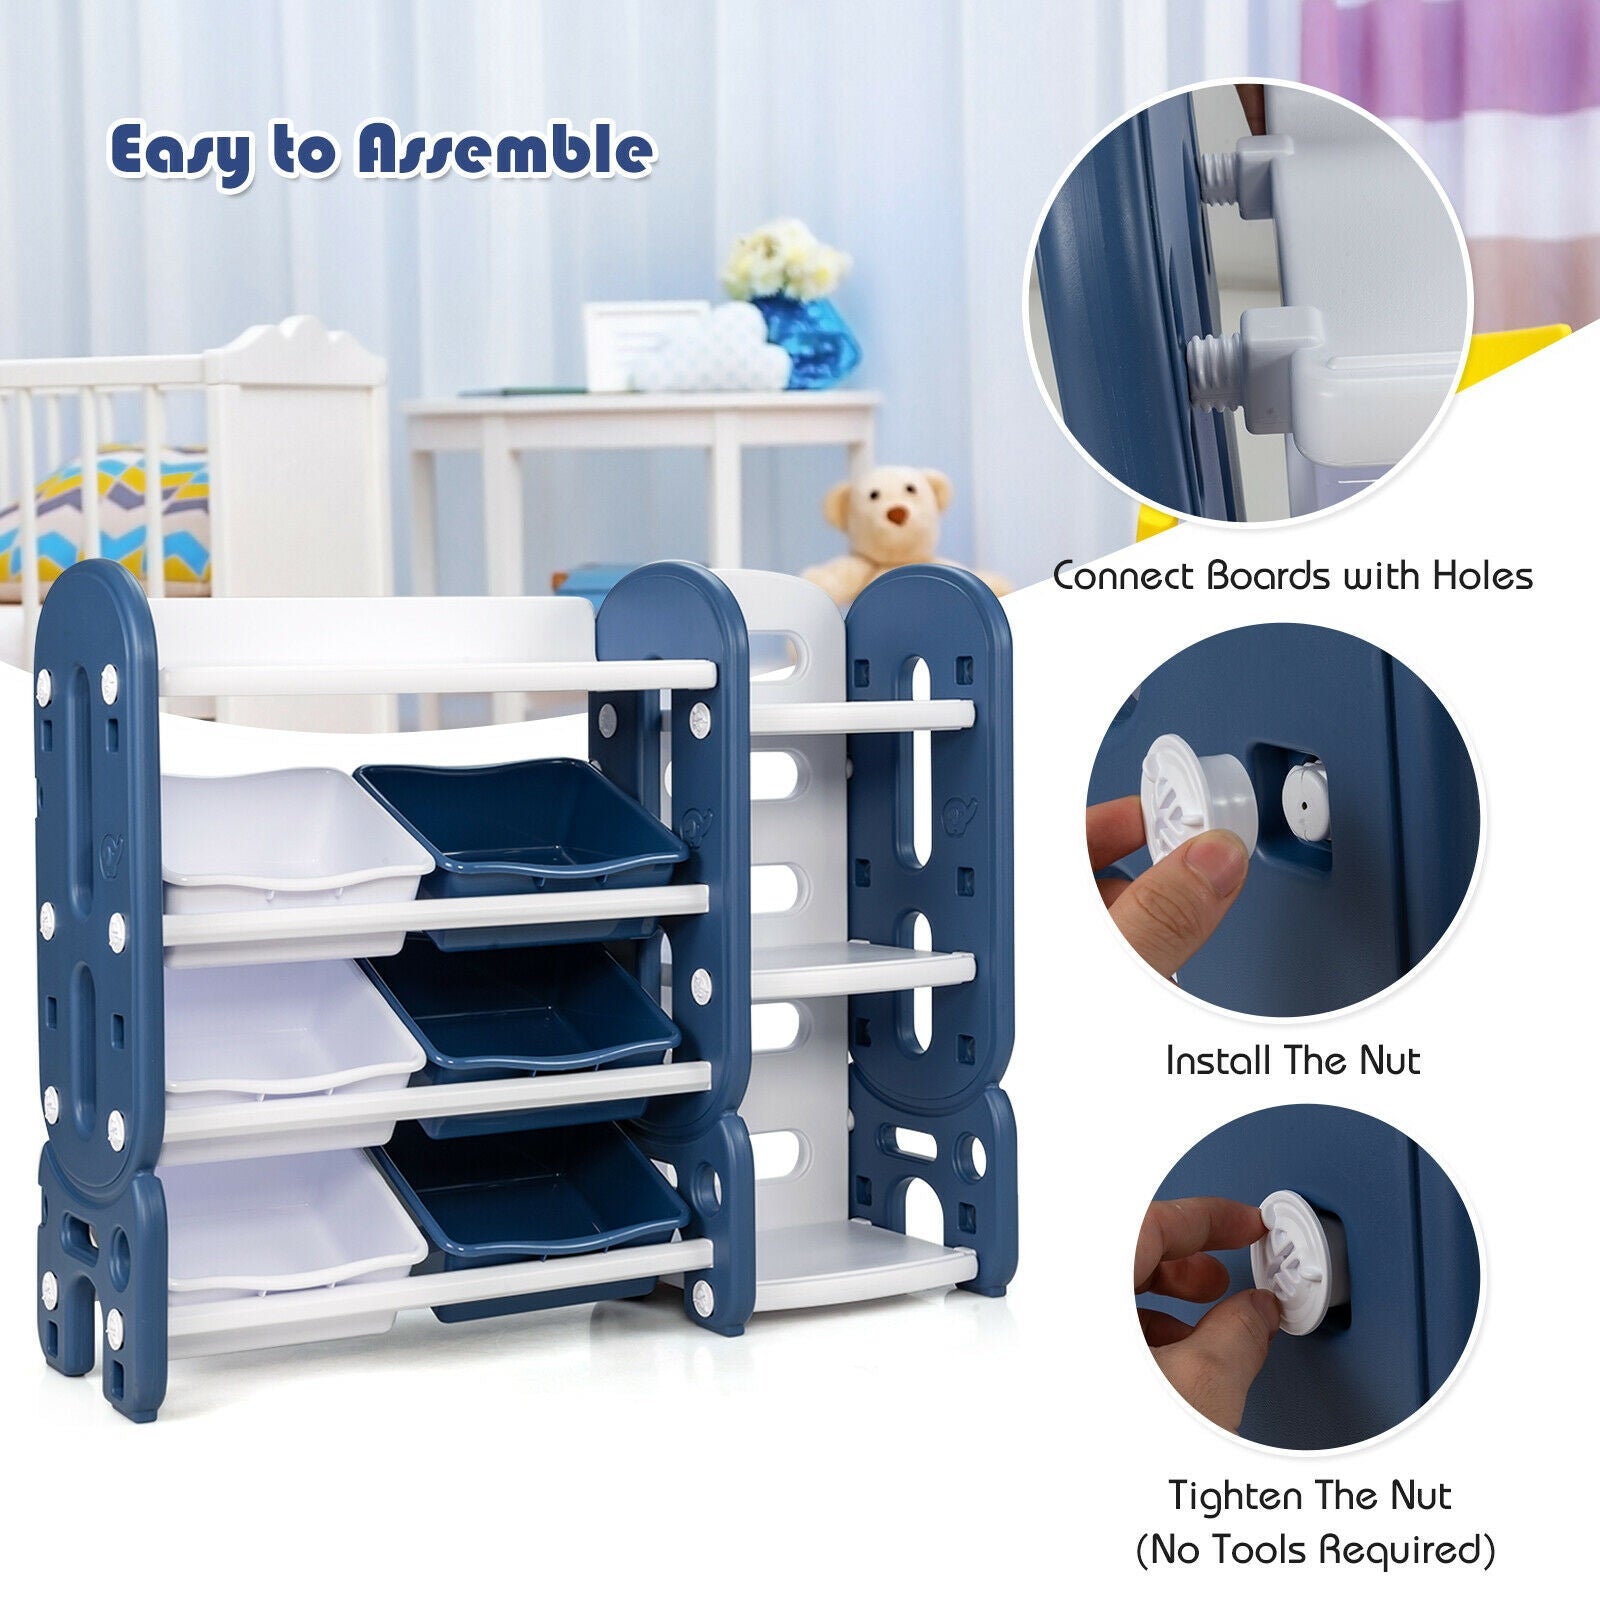 Kids Toy Storage Organizer with Bins and Multi-Layer Shelf for Living room and Playroom